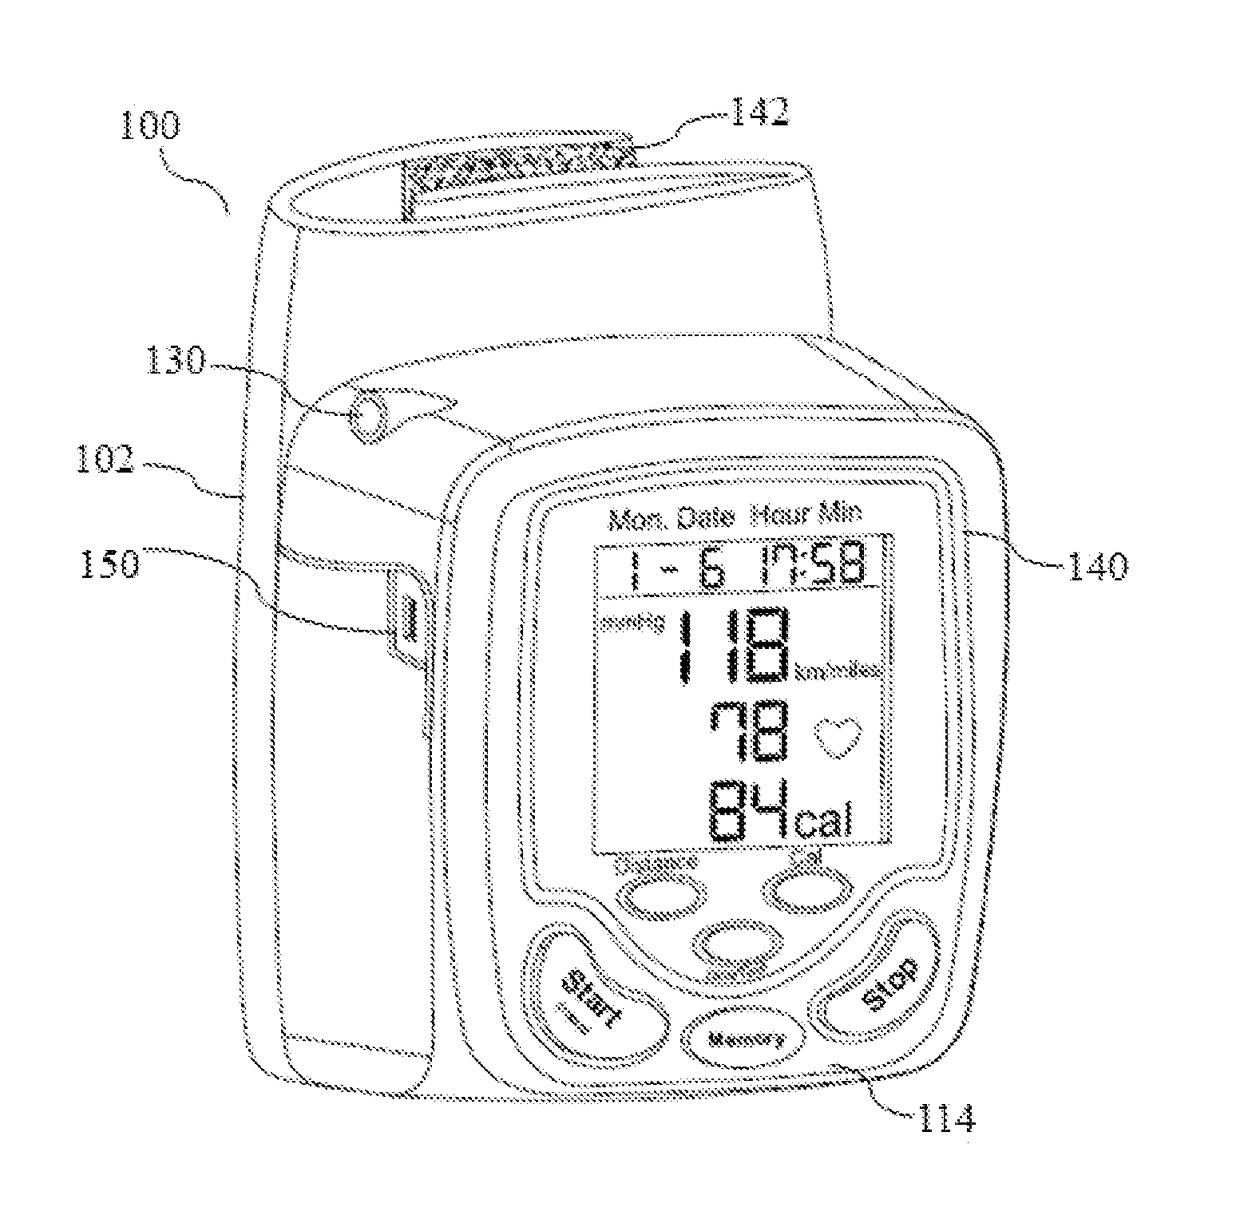 Fitness monitoring device